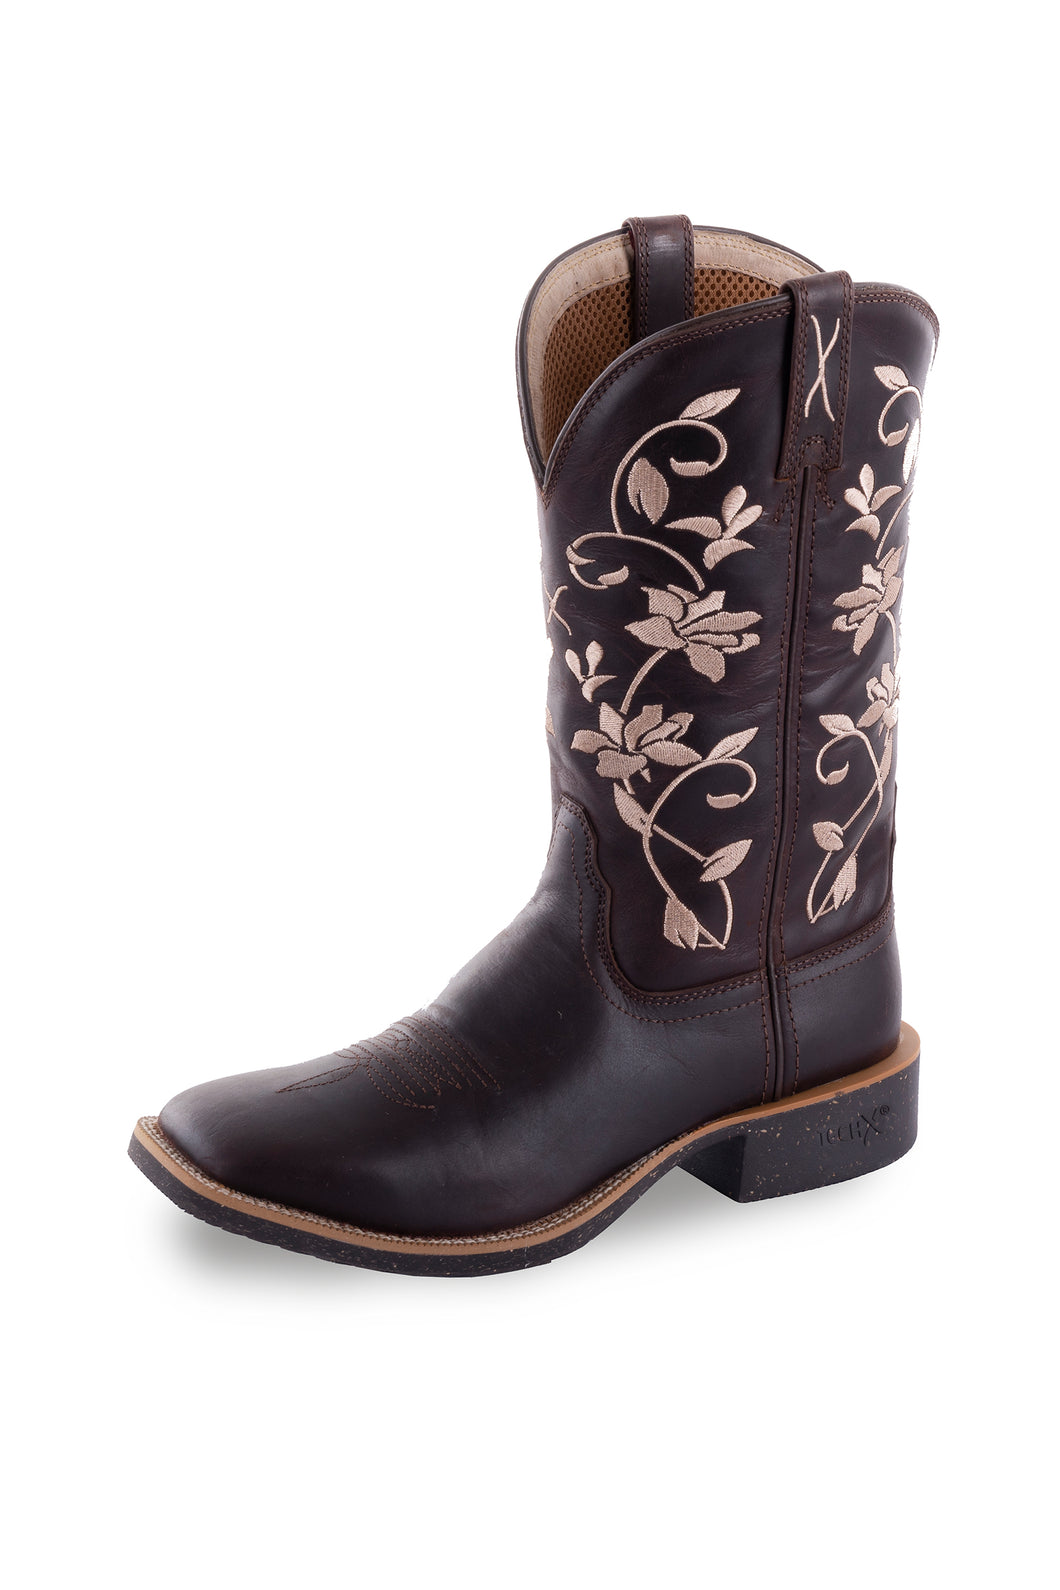 TWISTED X WOMENS 11 TECH X2 BOOT